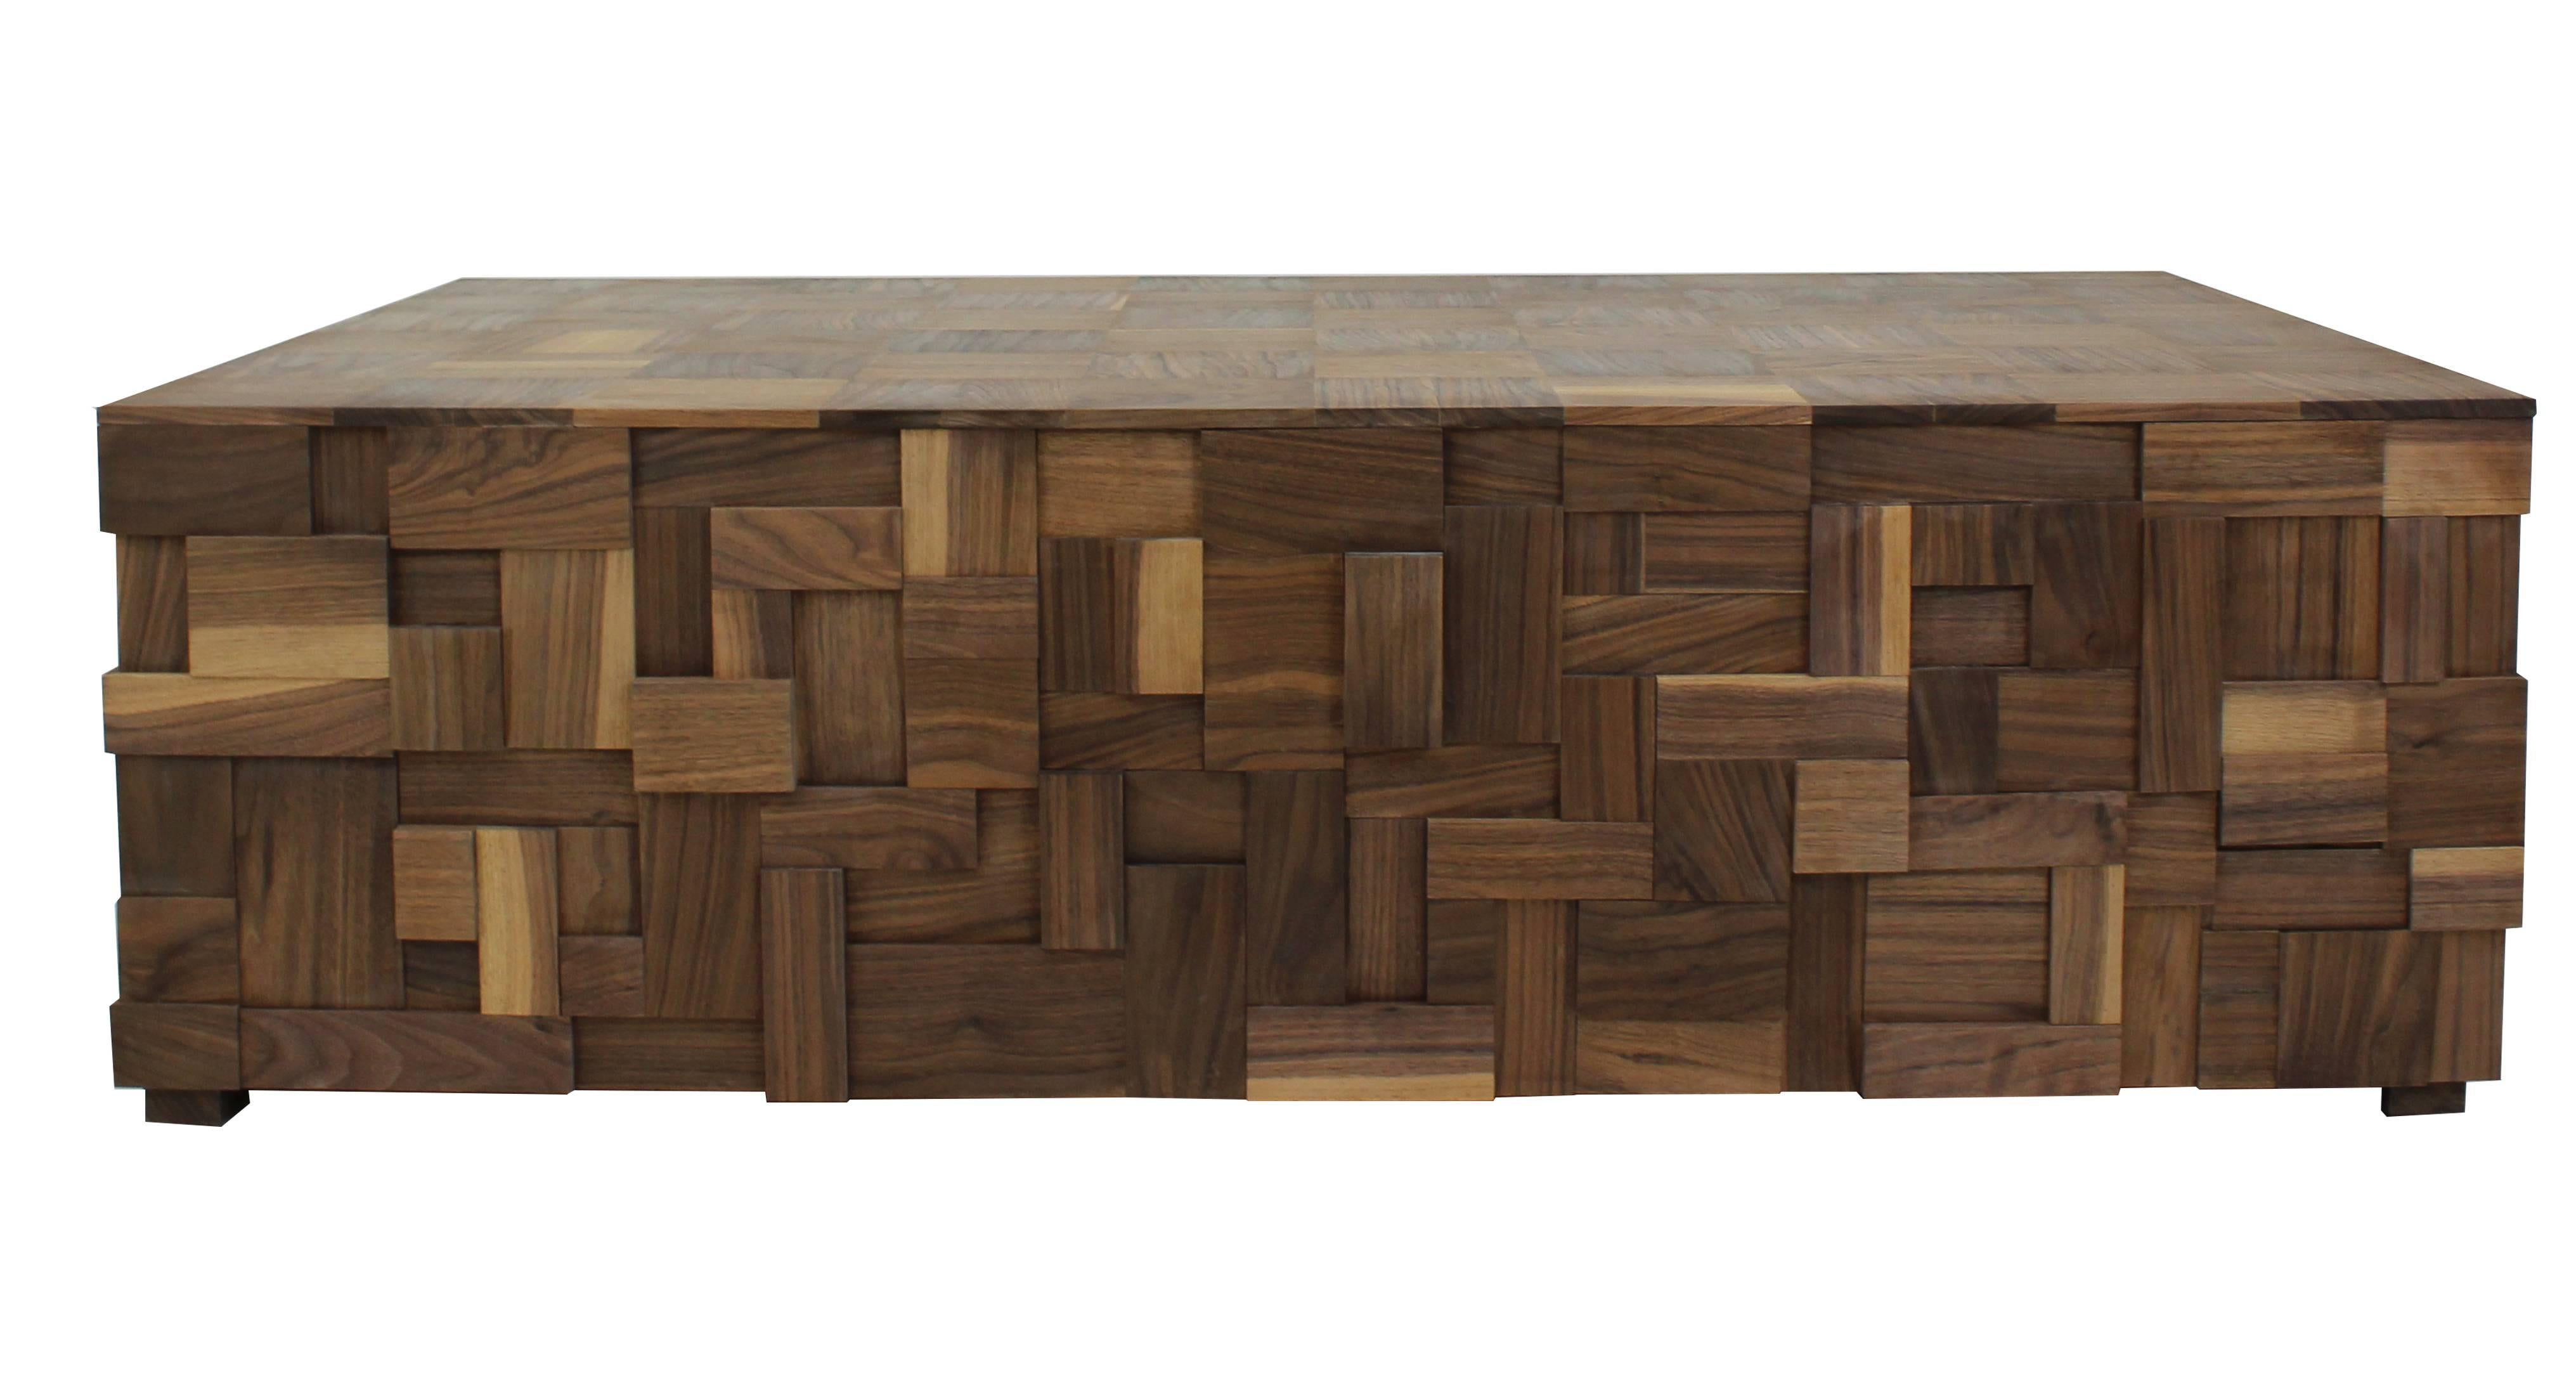 Modern meets rustic with this one of a kind coffee table hand built by us at our studio in Norwalk, Connecticut. The table features a poplar frame and walnut exterior cut into a mosaic design with a parquet top. 

Measurements: 18